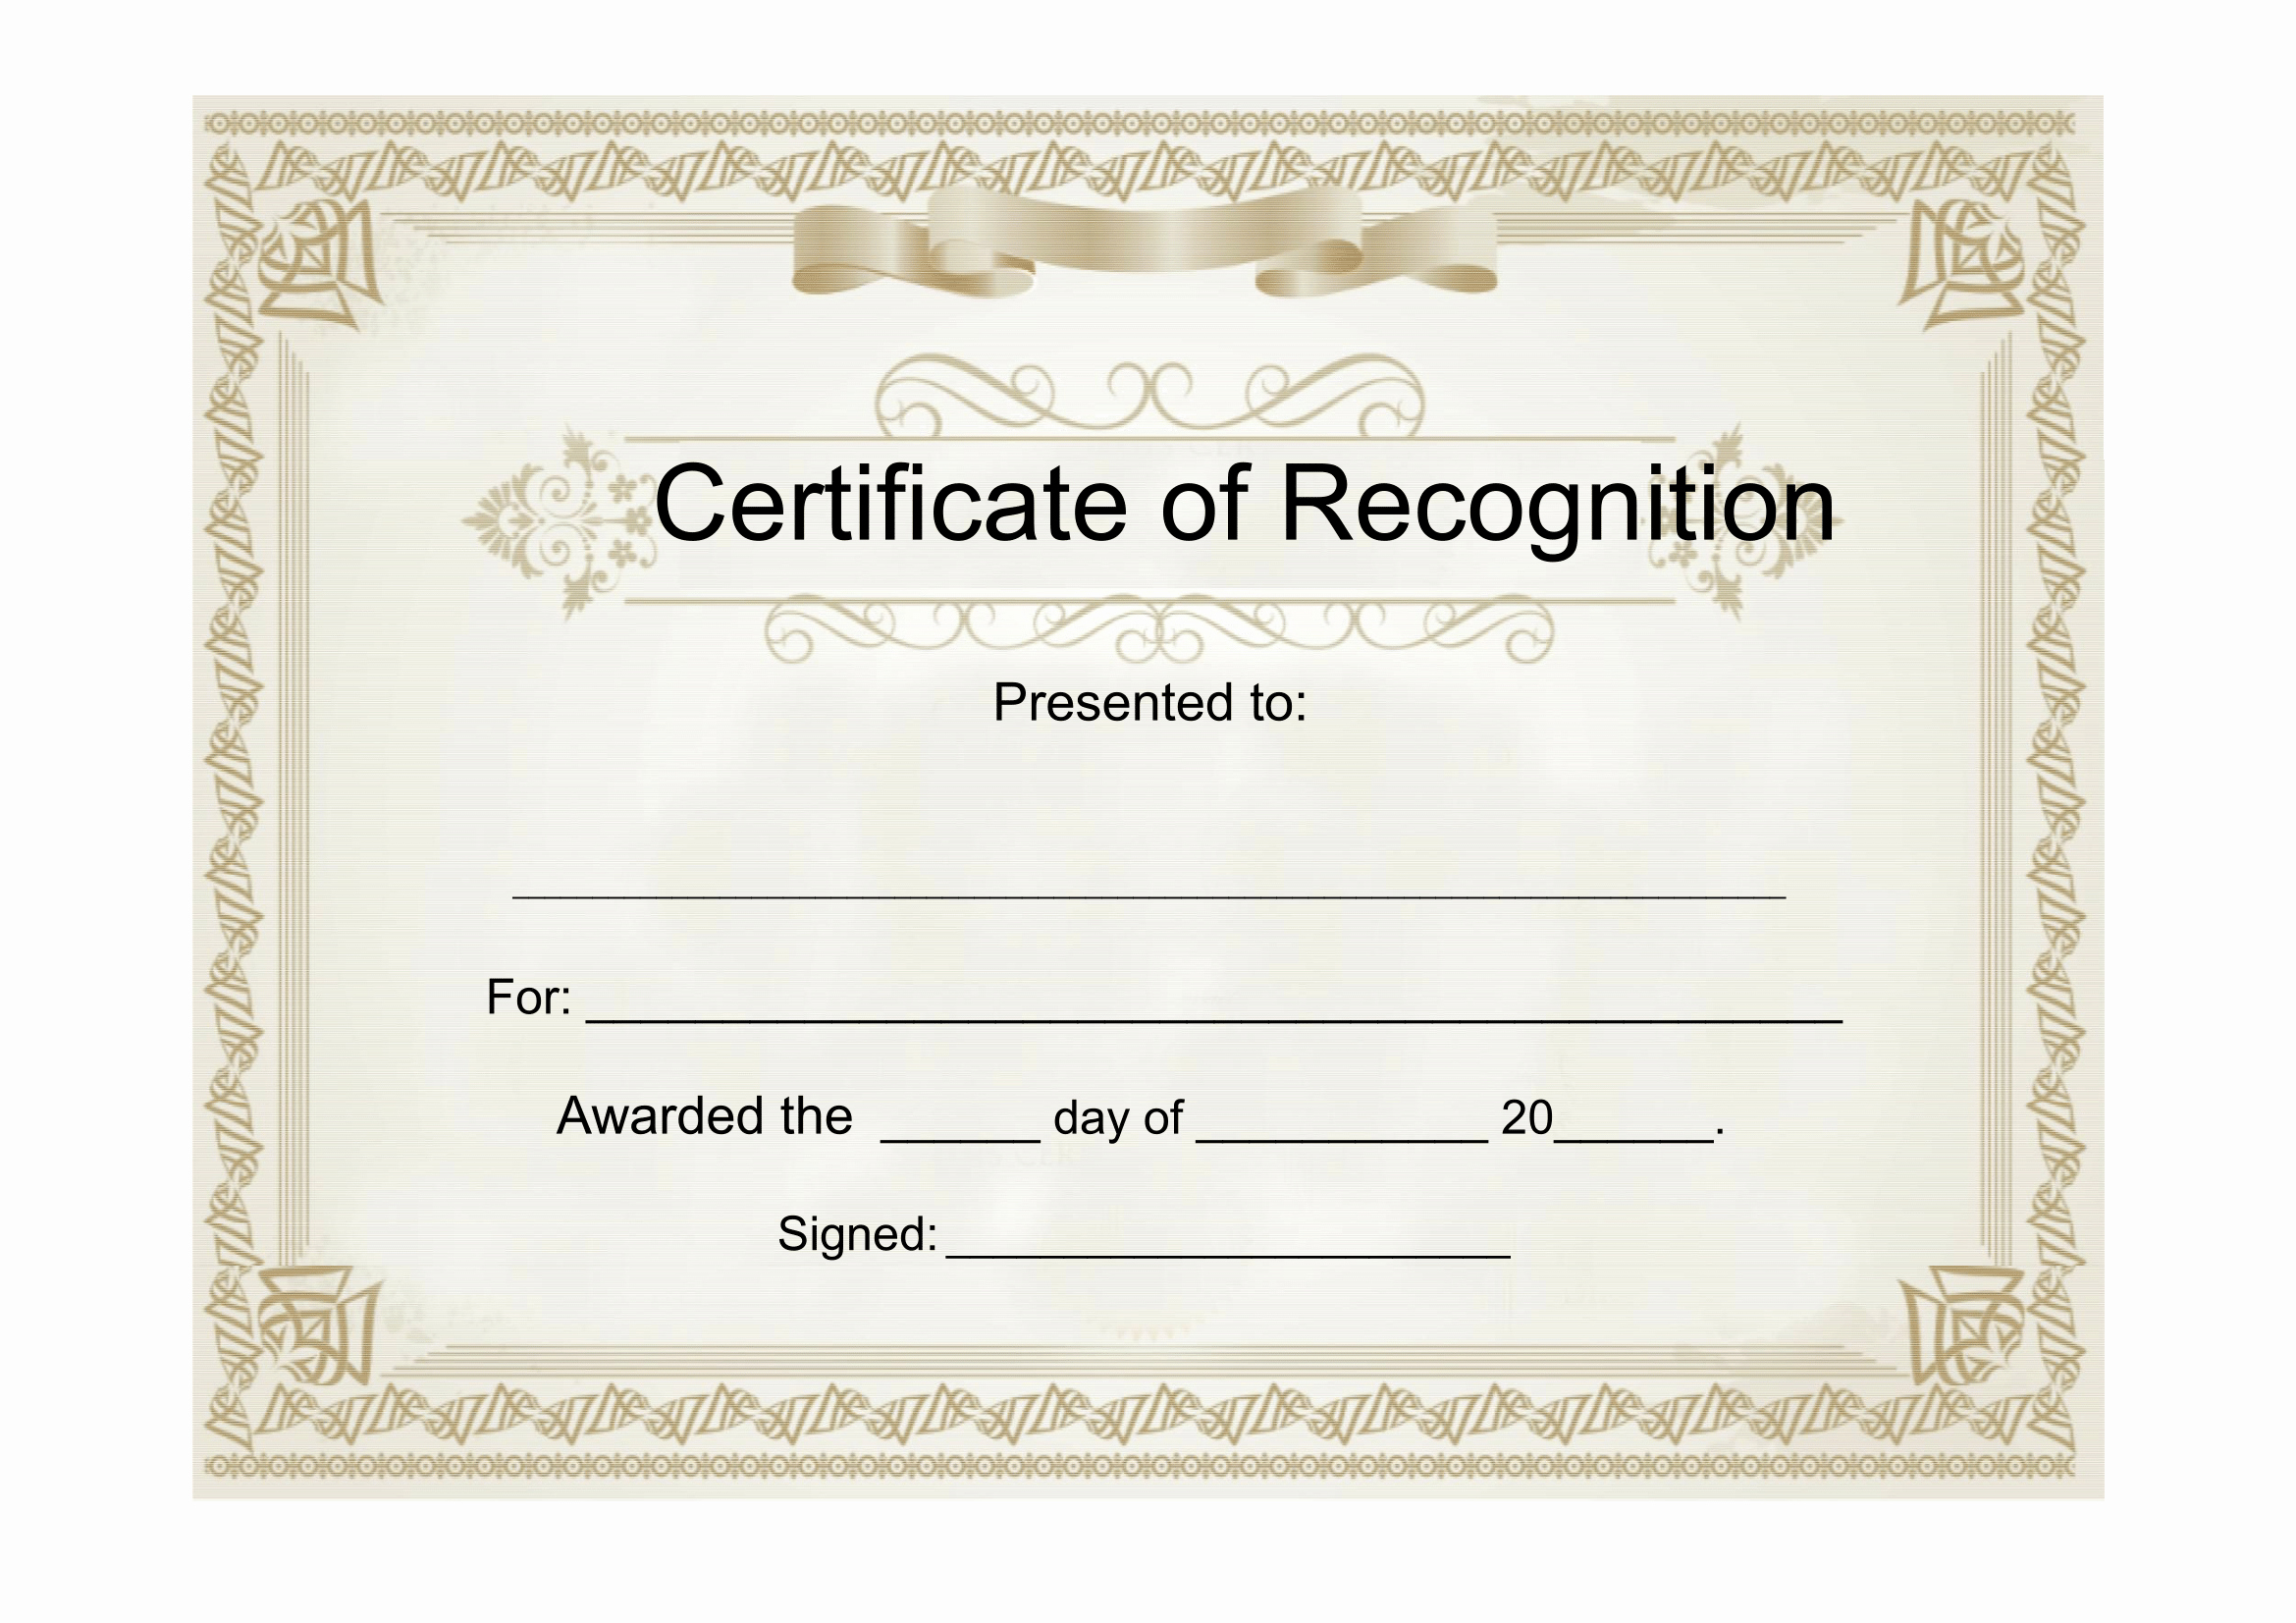 Sample Certificate Of Recognition Free Download Template